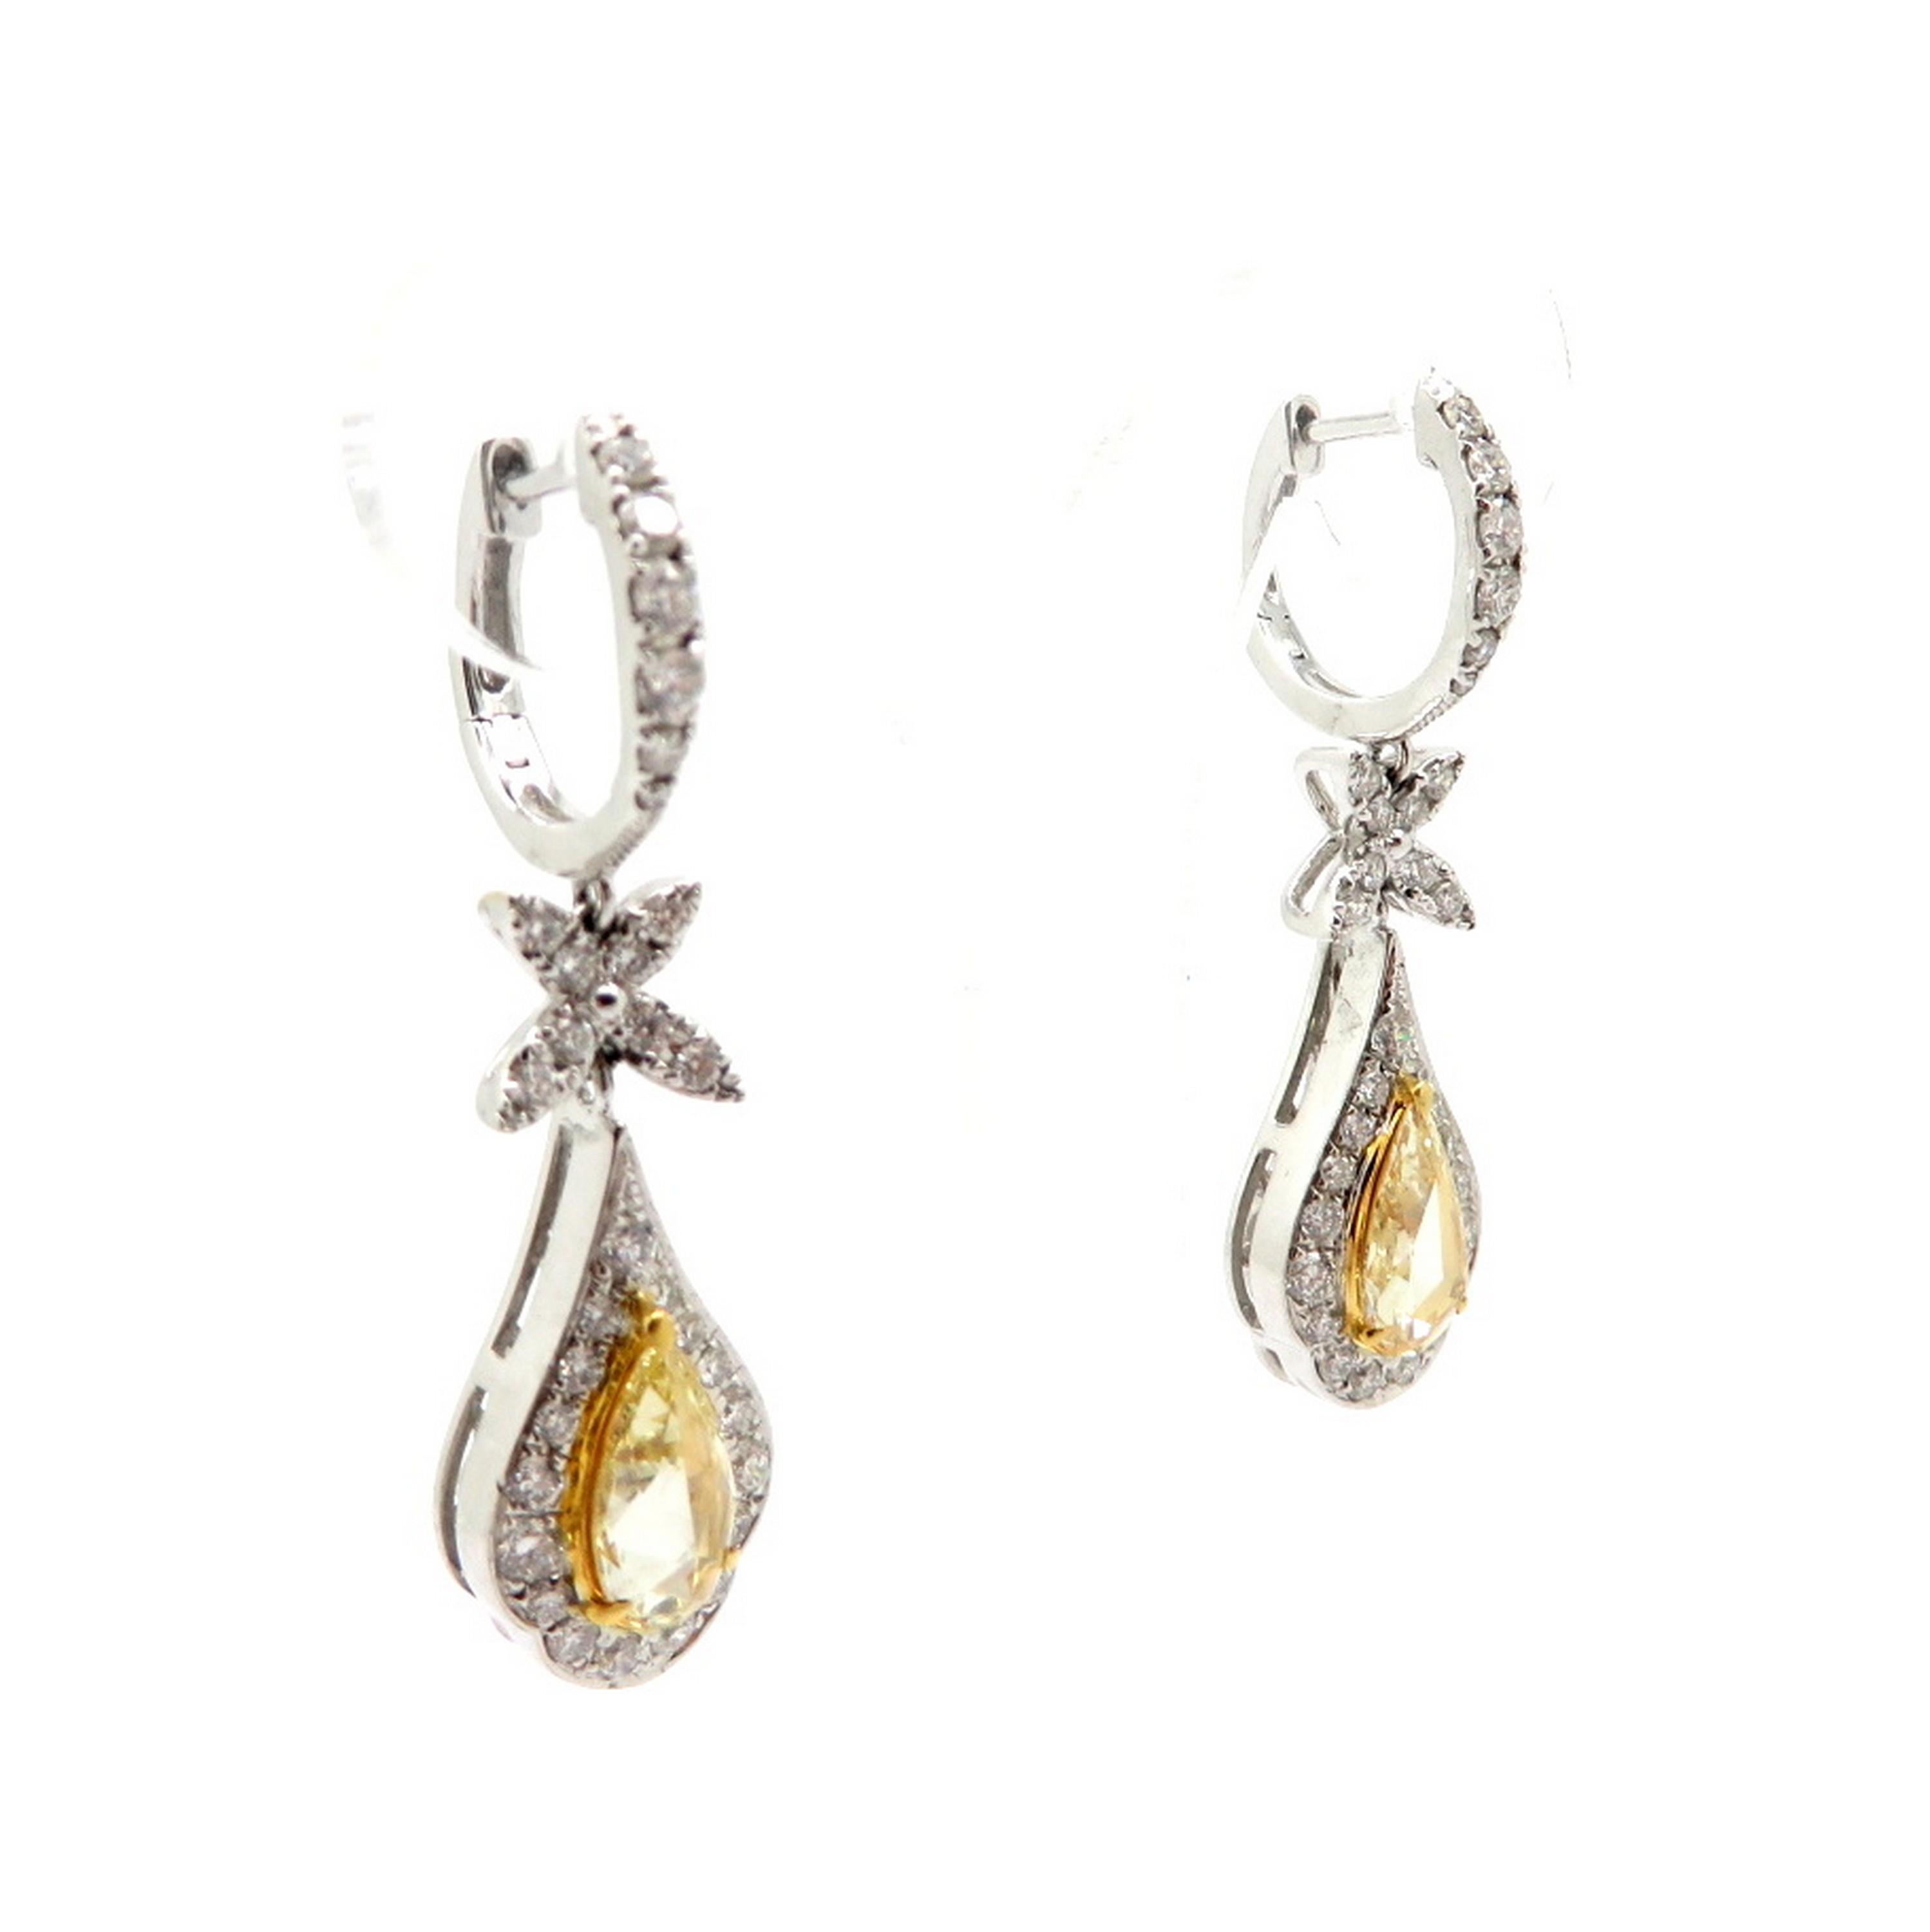 Estate 18K two-tone gold dangle hoop rose cut yellow diamond fashion earrings. Showcasing two fancy yellow rose cut diamonds, each three prong set, having SI1 clarity grade, weighing a combined total of approximately 1.33 carats. Accented with 62